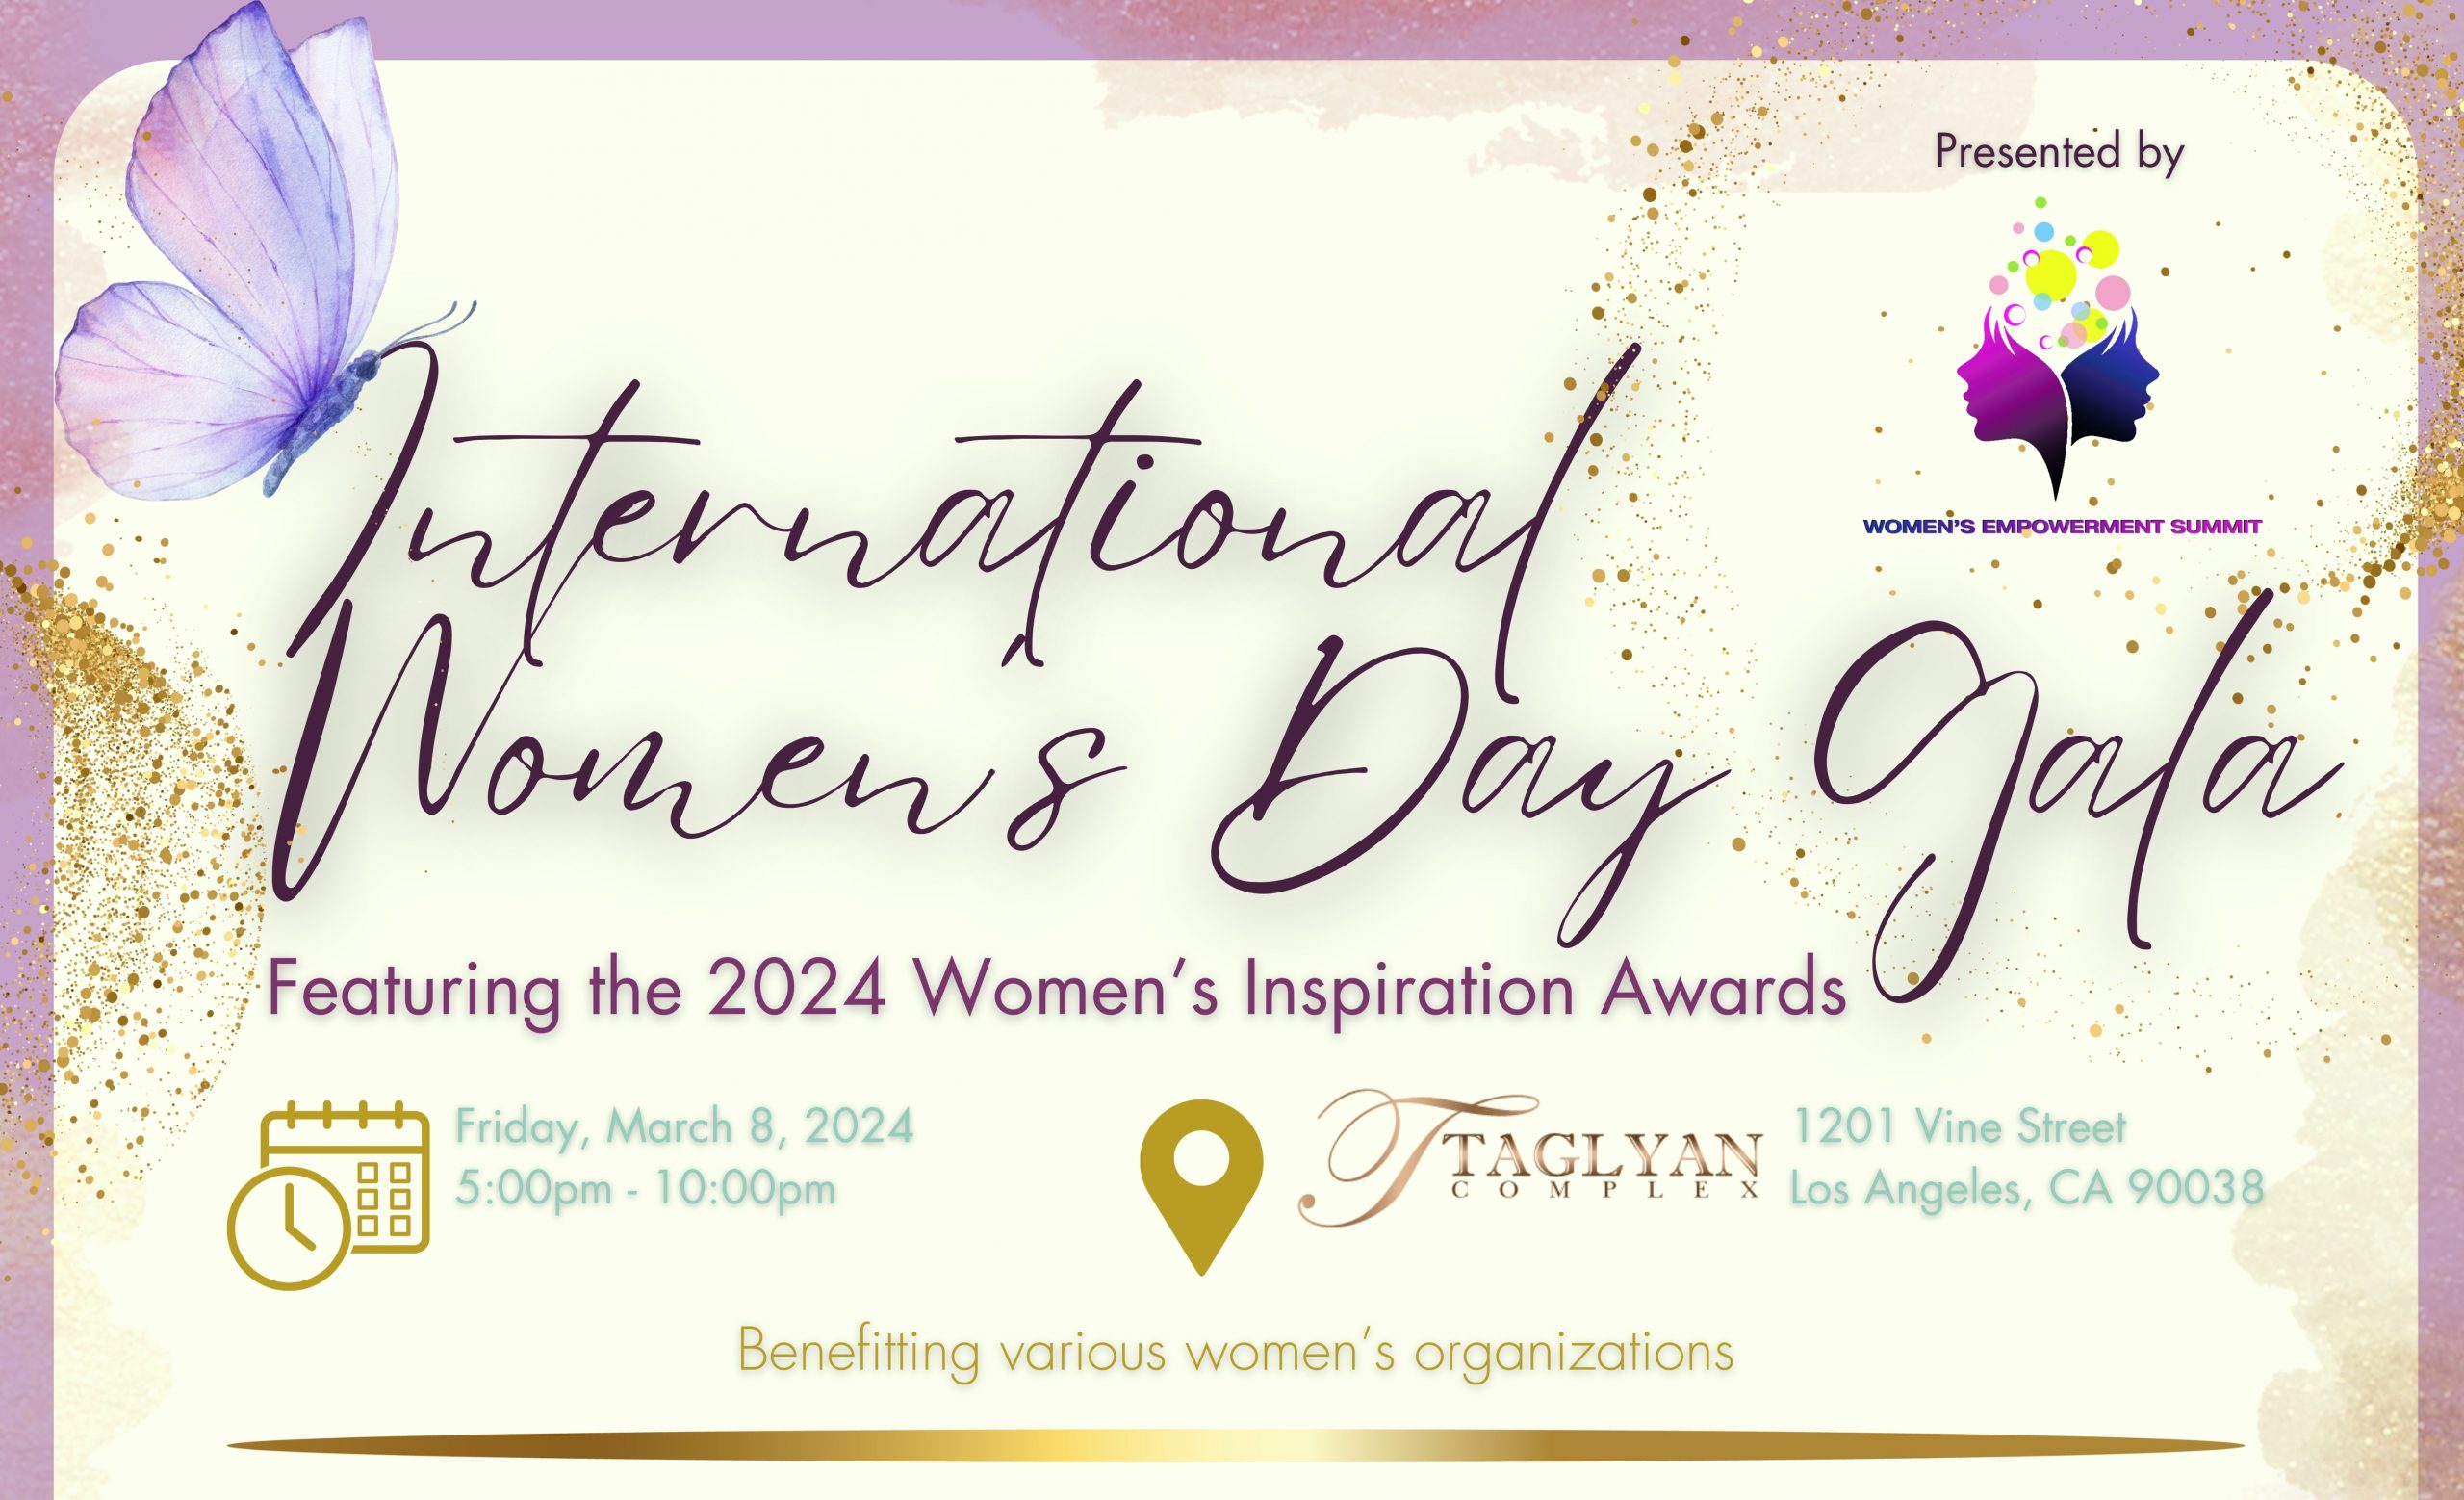 Kim Estes Selected as Master of Ceremonies for International Women’s Day Inspiration  Awards  Gala for 2024